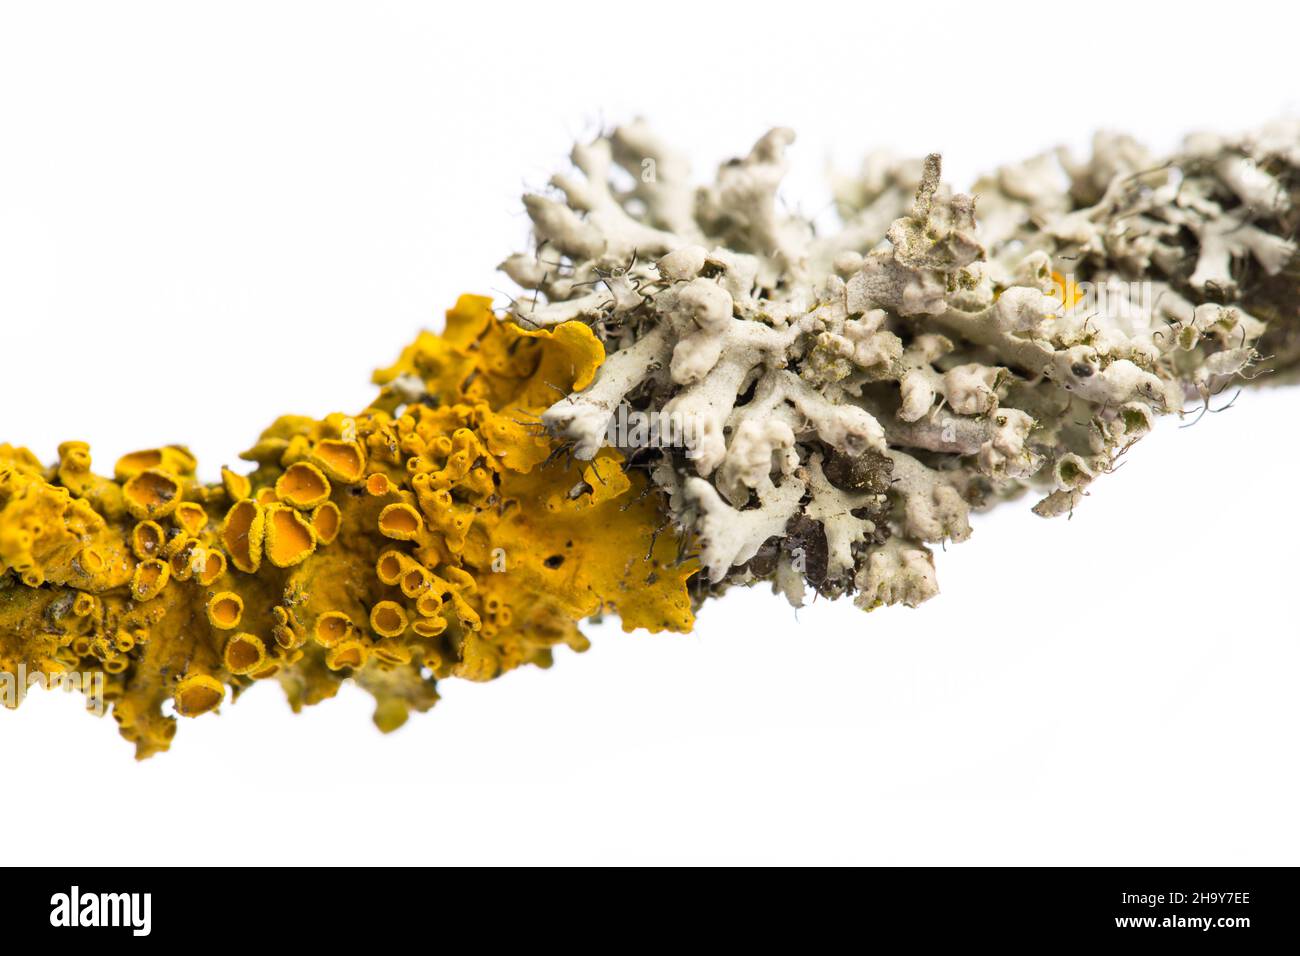 lichen, yellow, gray, branch, twig, tree, together, nature, against each other, grow, plants, overgrow, smother, fungus, algae, mold, shape, structure Stock Photo